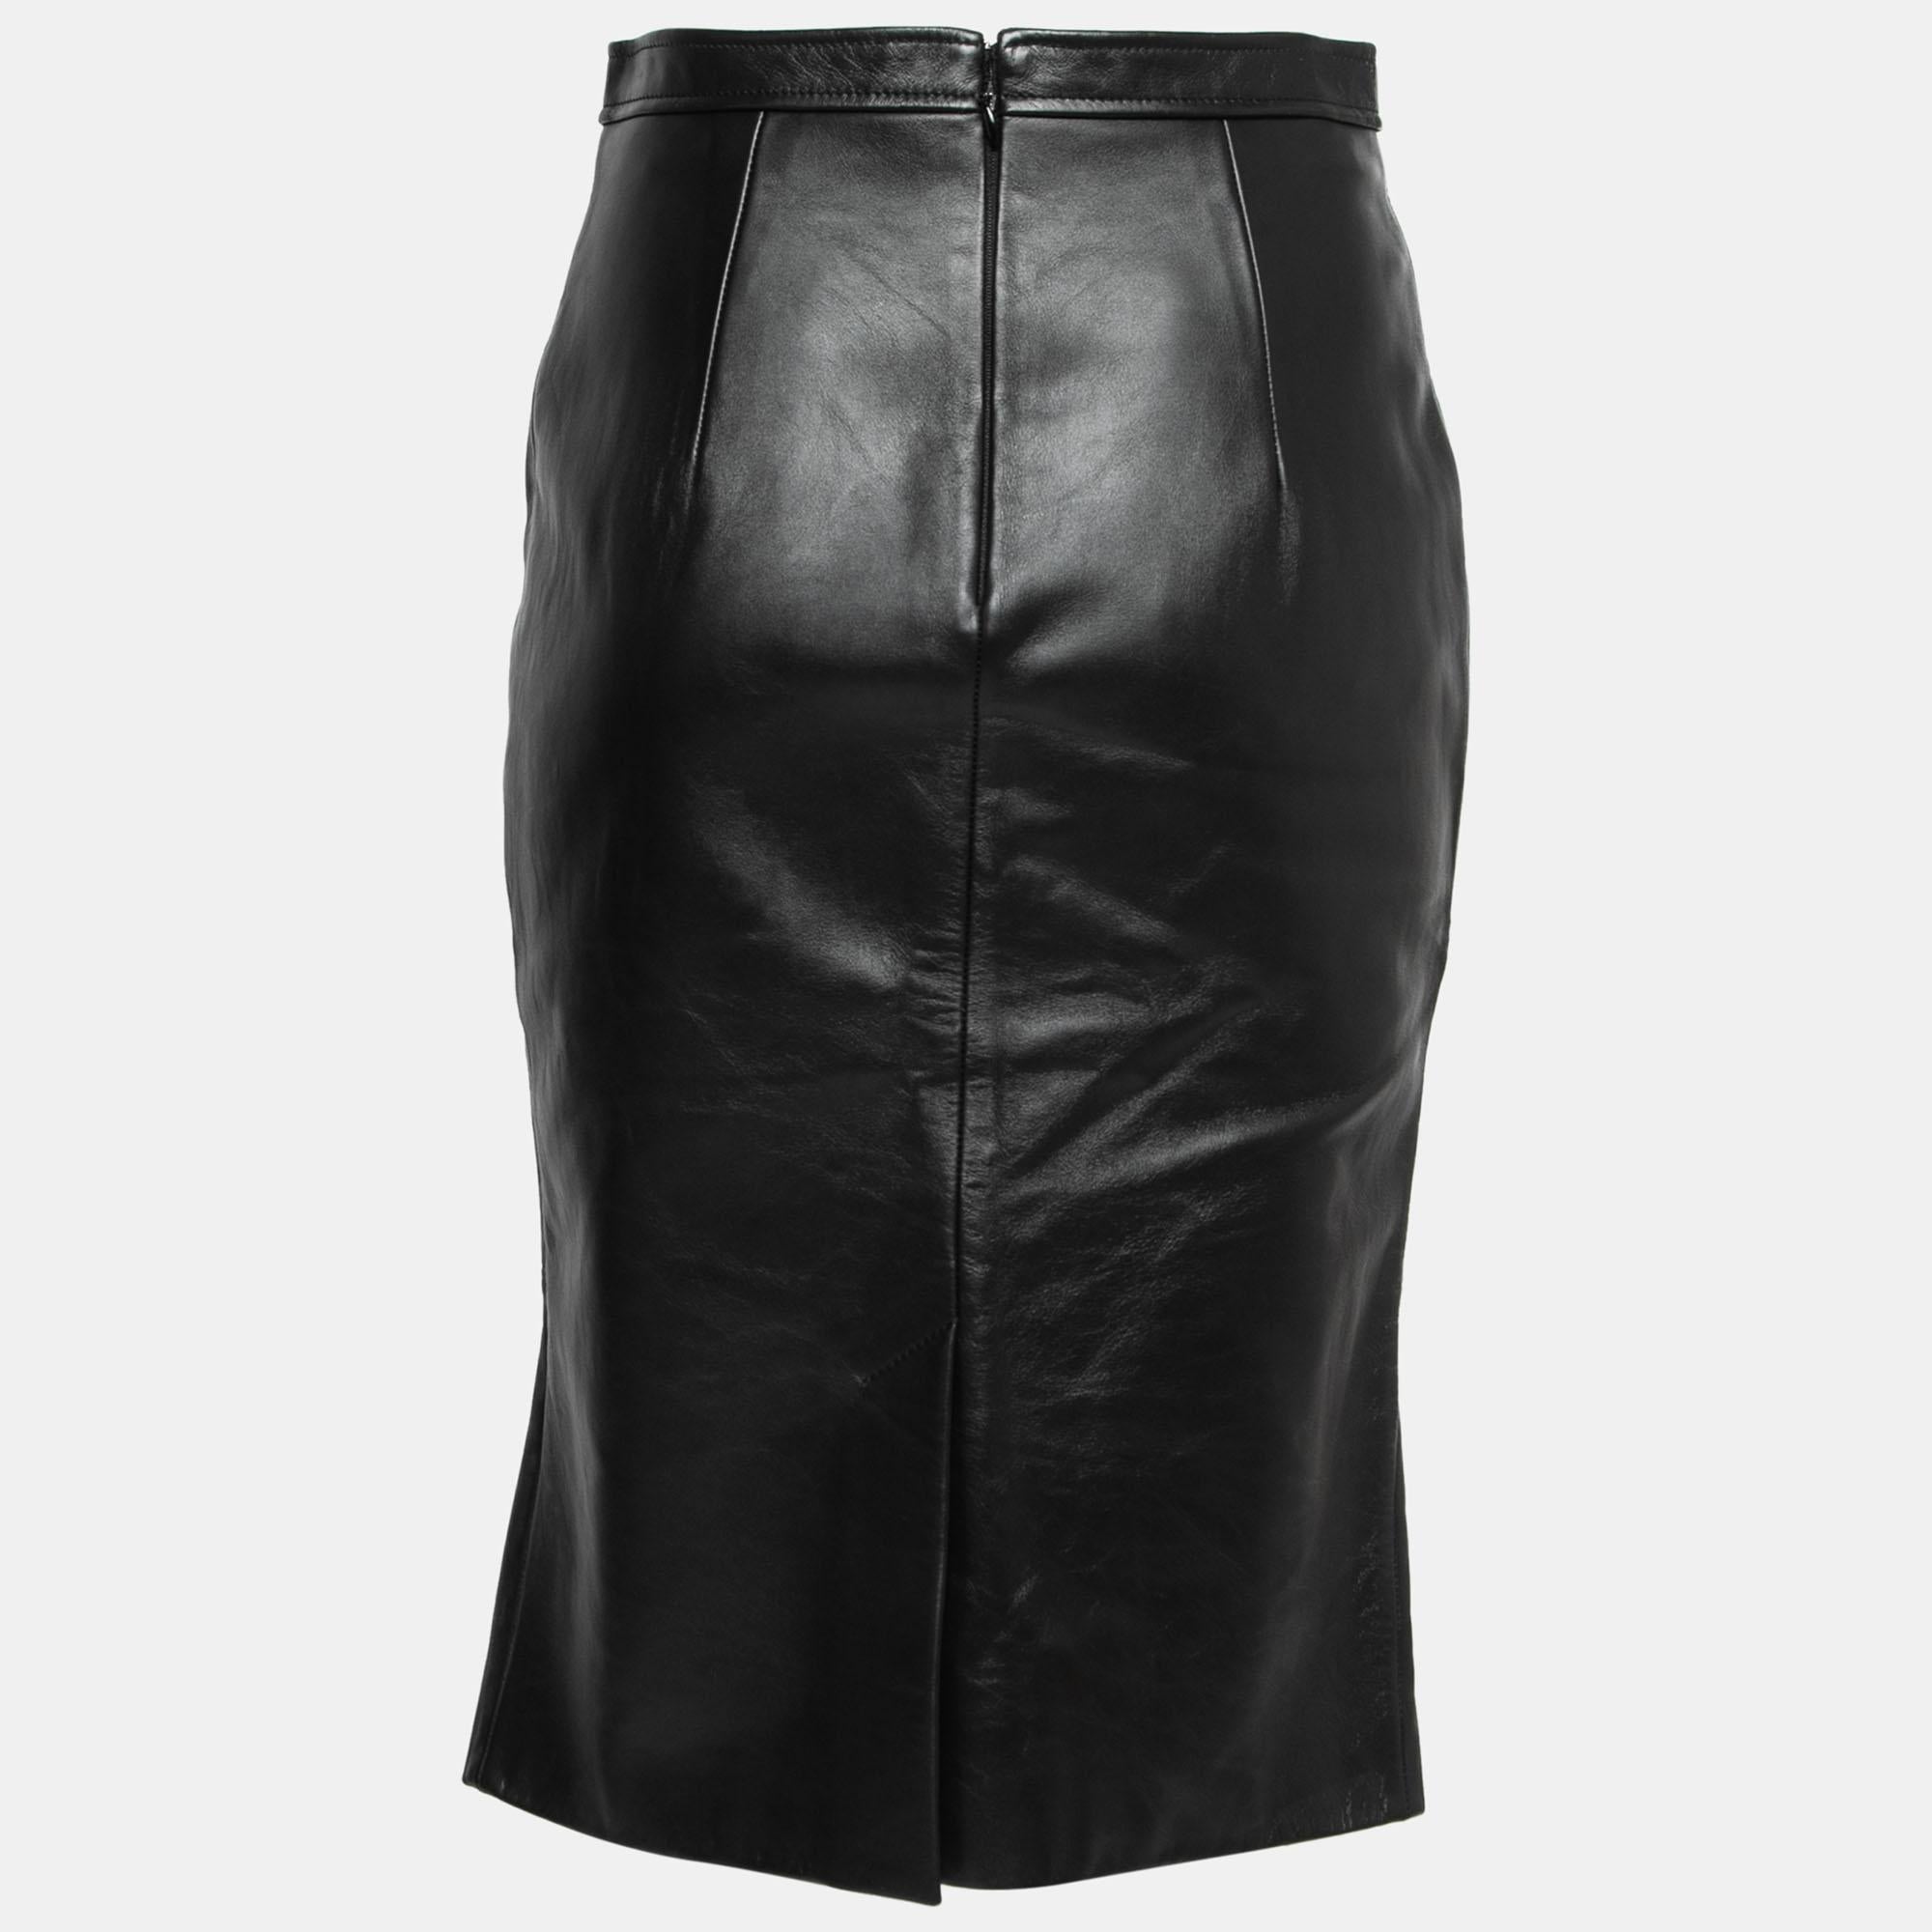 This elegant skirt is worth adding to your closet! Crafted from fine materials, it is exquisitely designed into a flattering shape.

Includes: Price Tag